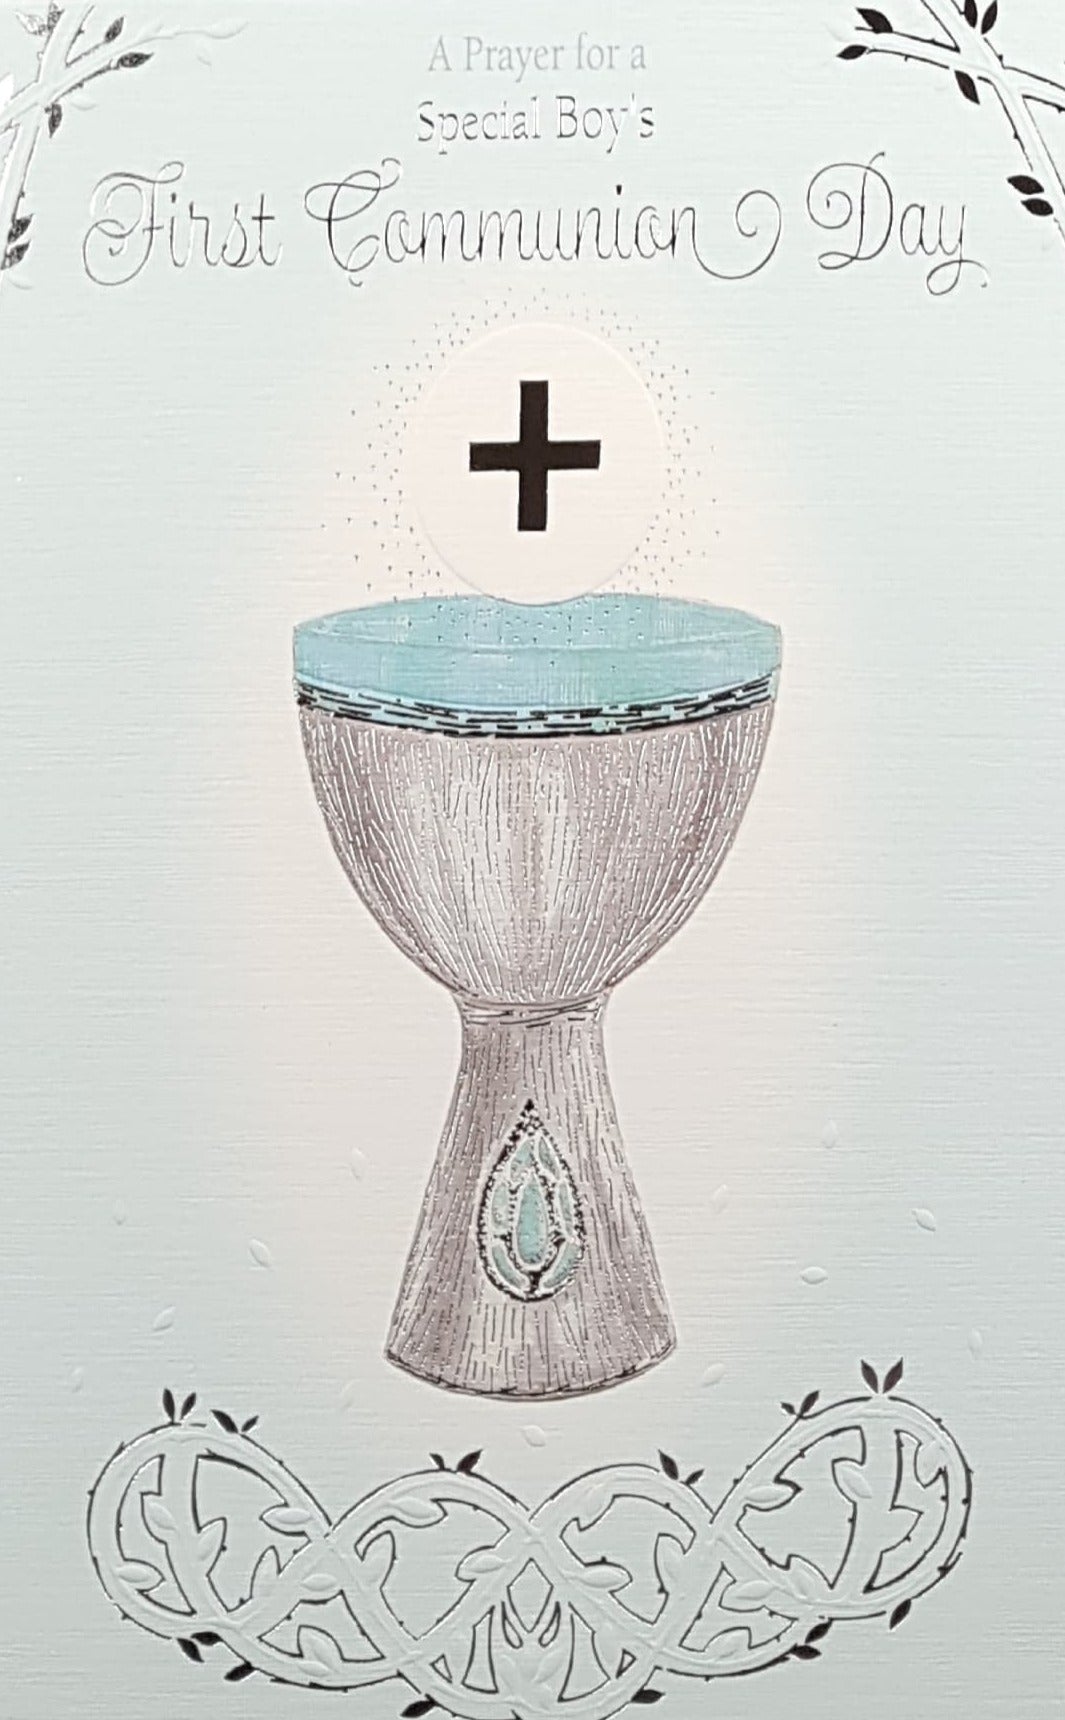 Communion Card - A Prayer For A Special Boy's First Communion Day